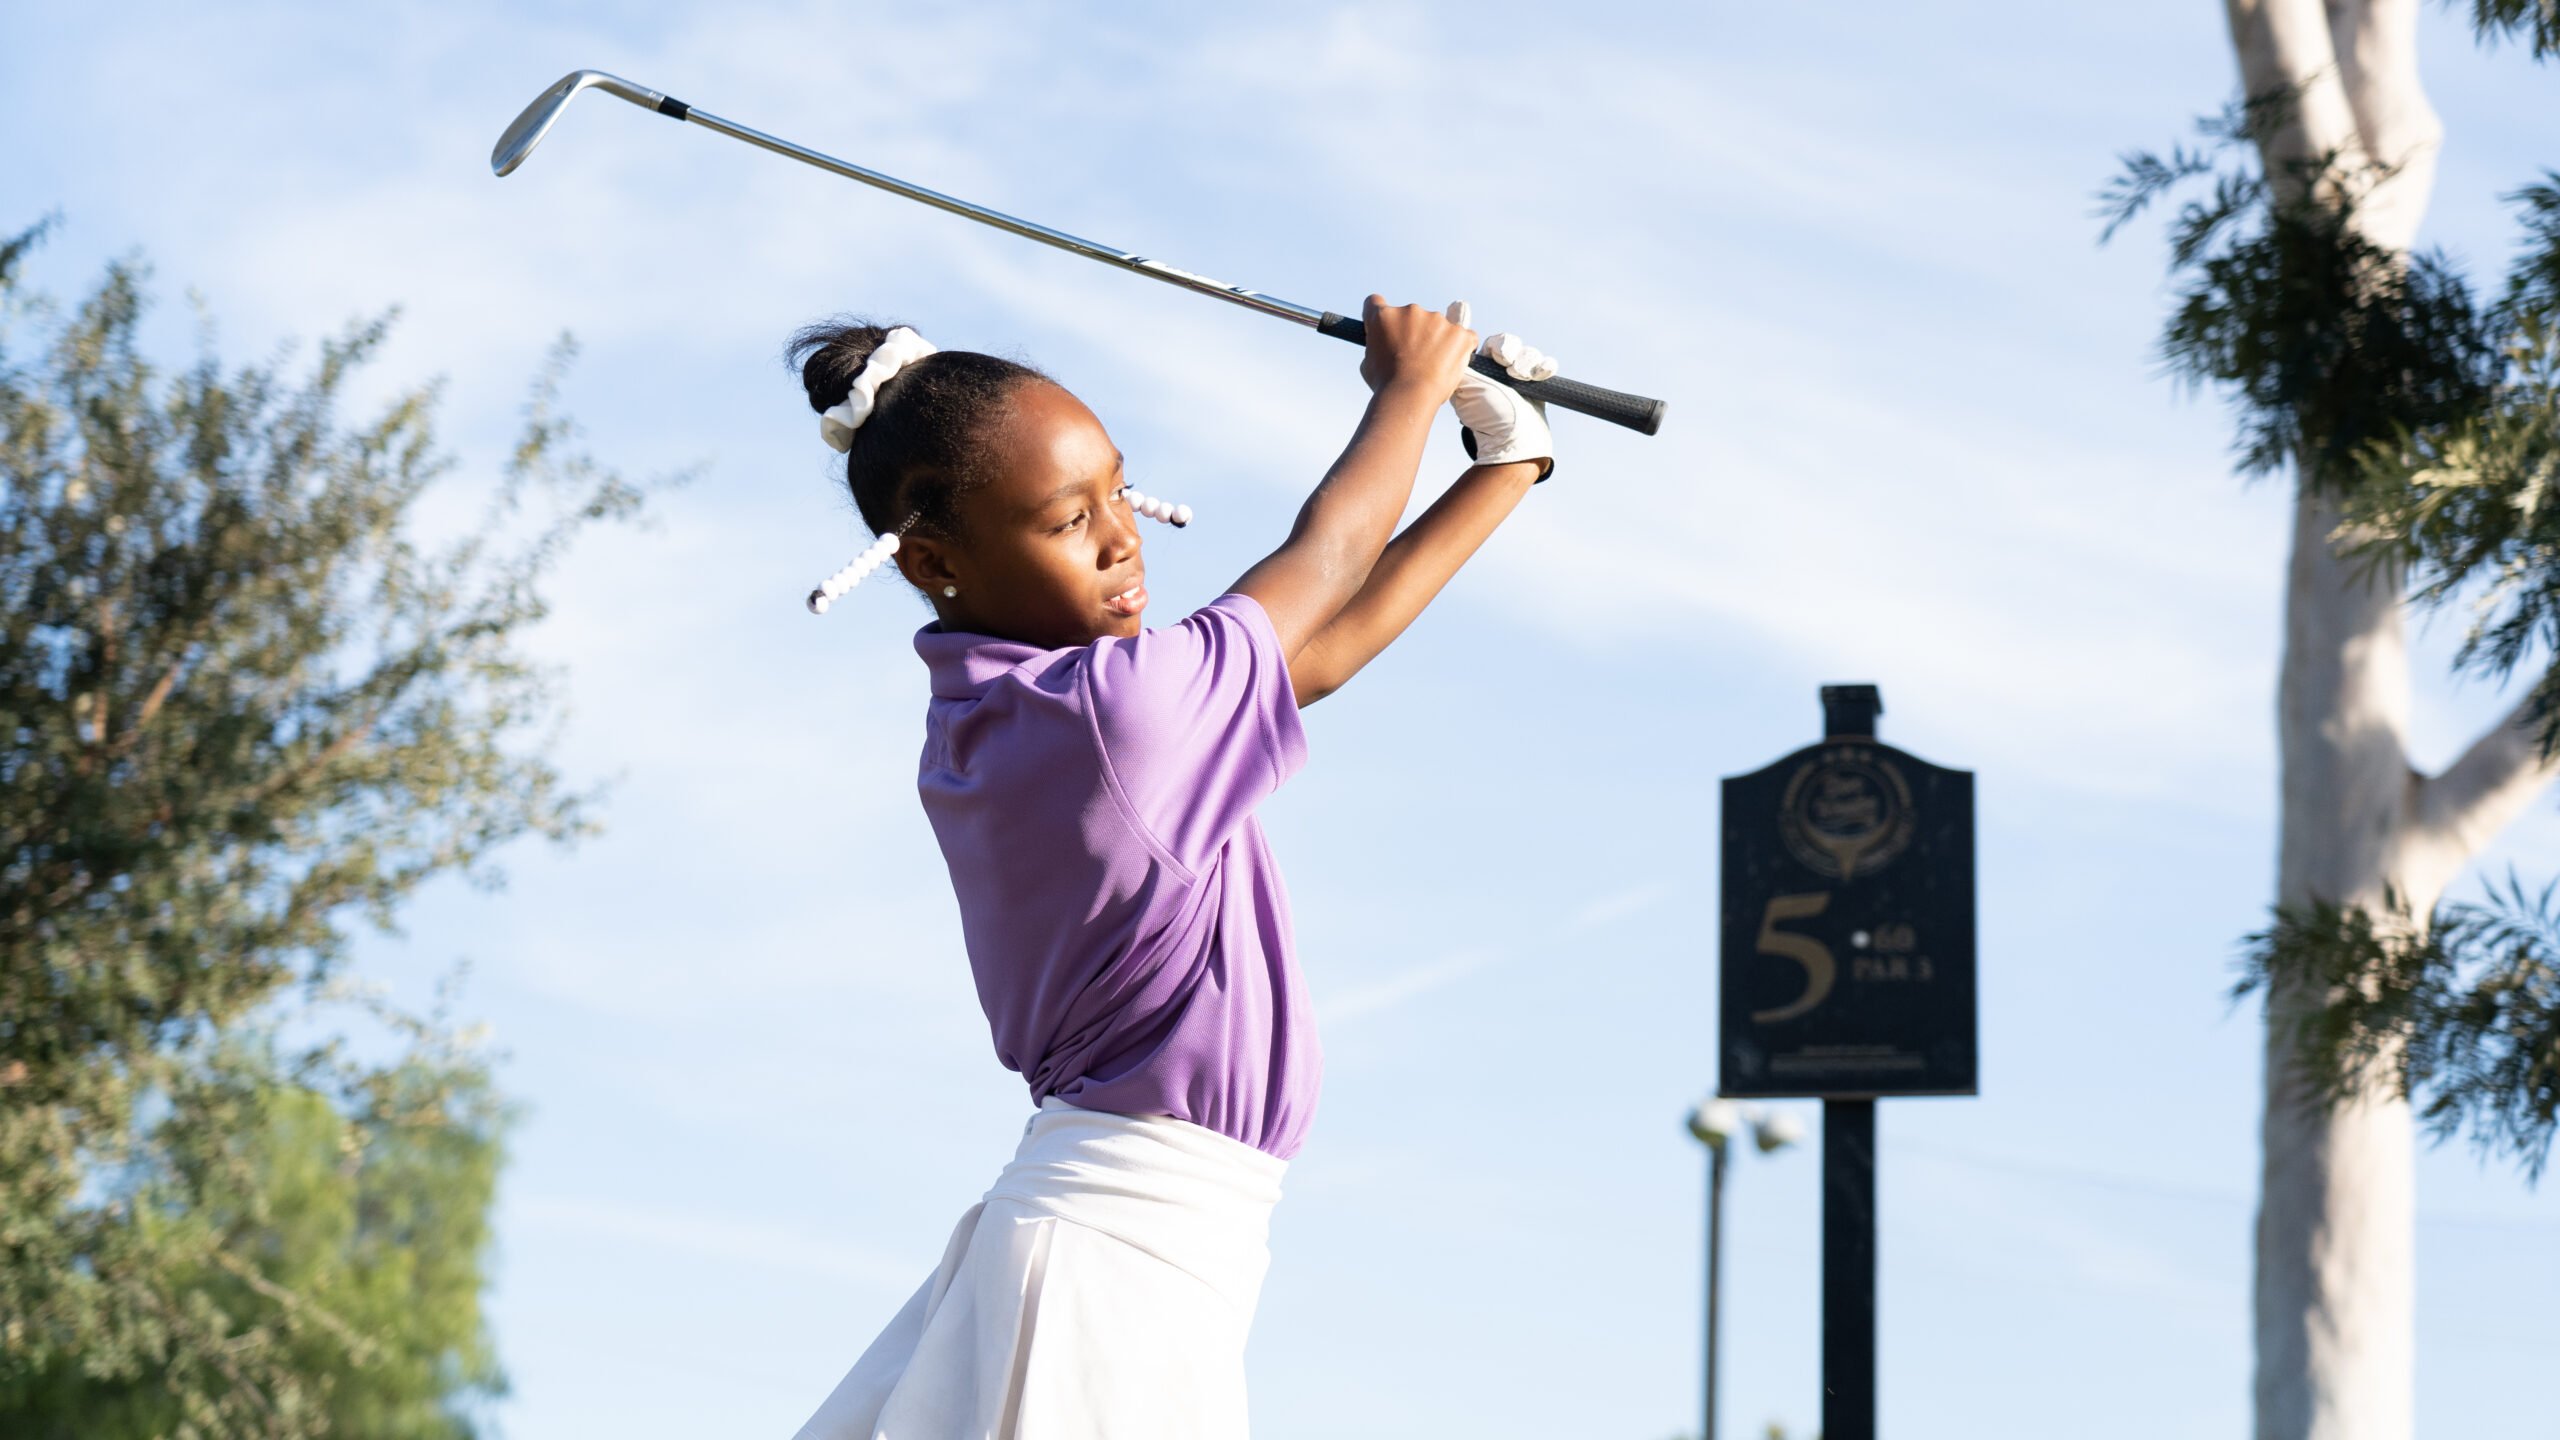 Golfer's Mindset in Goal Setting - How to Prepare for the 